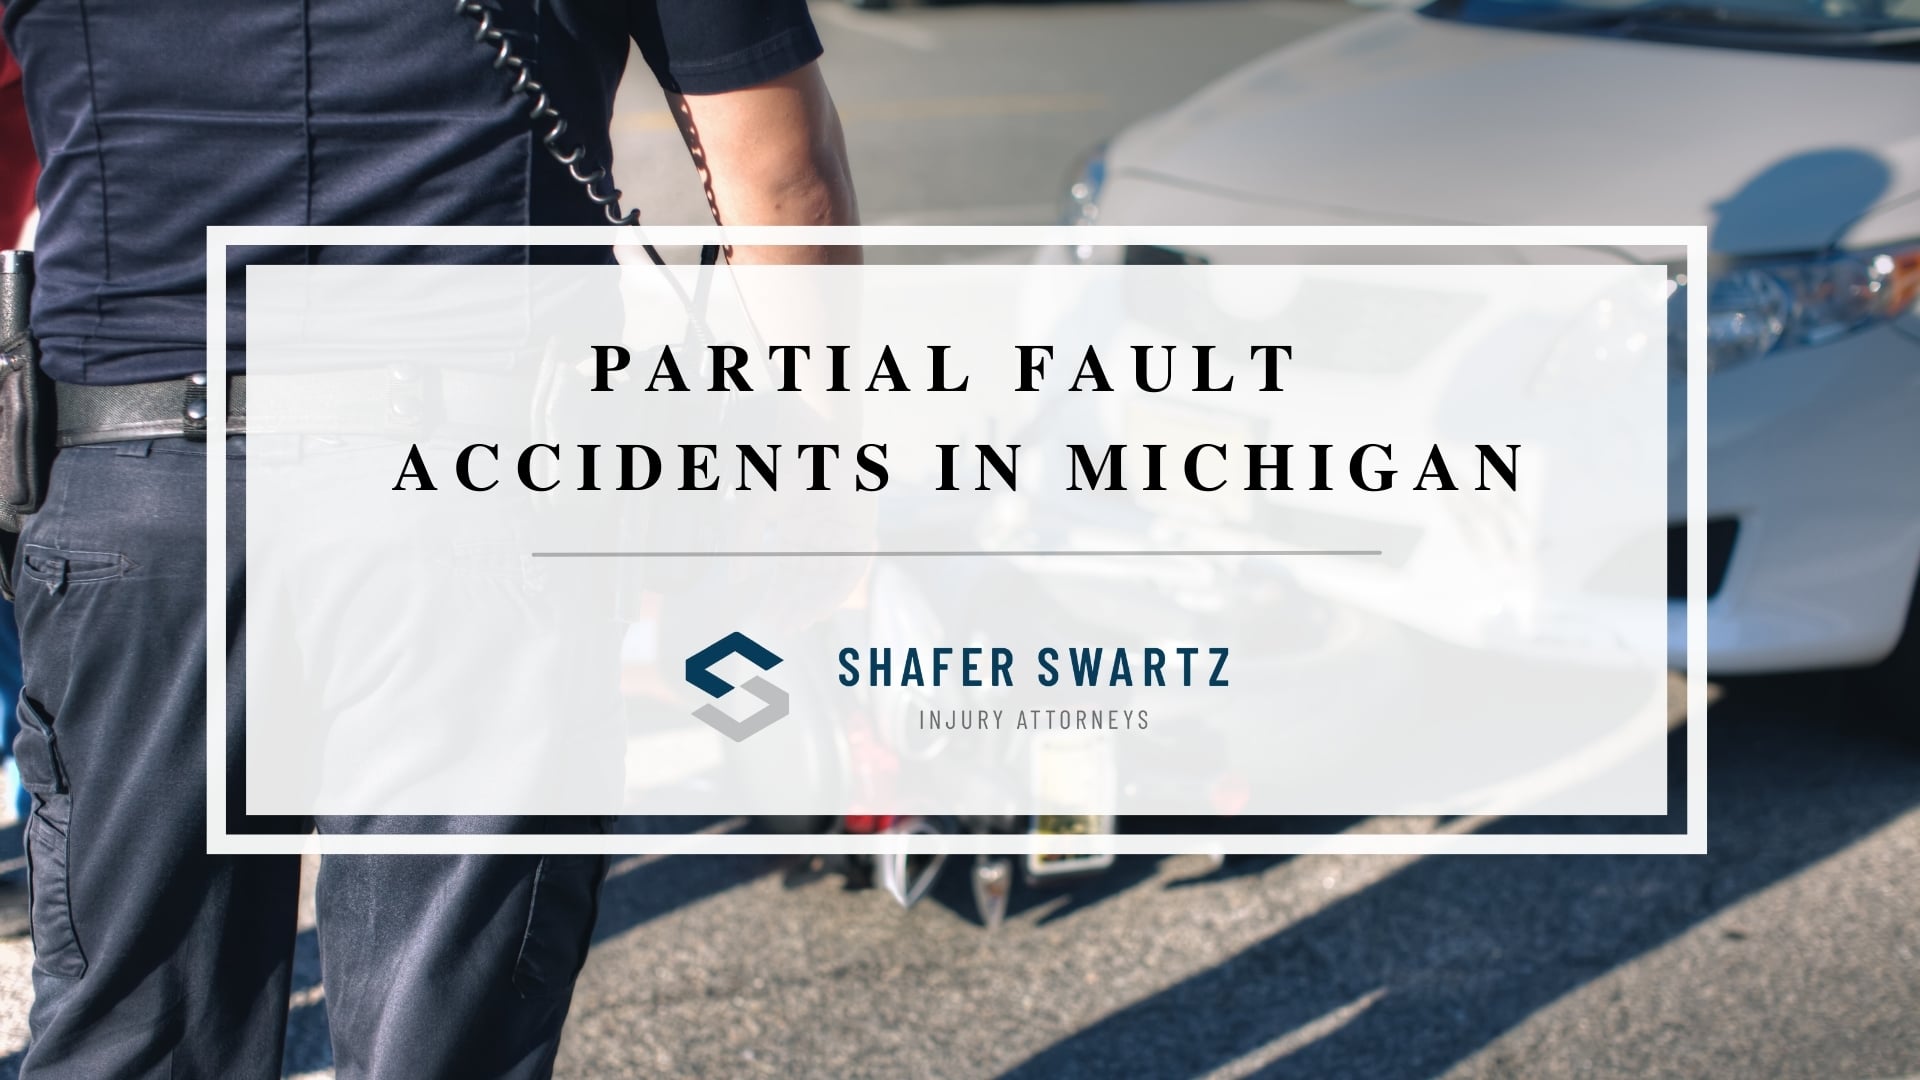 Featured image of partial fault accidents in Michigan